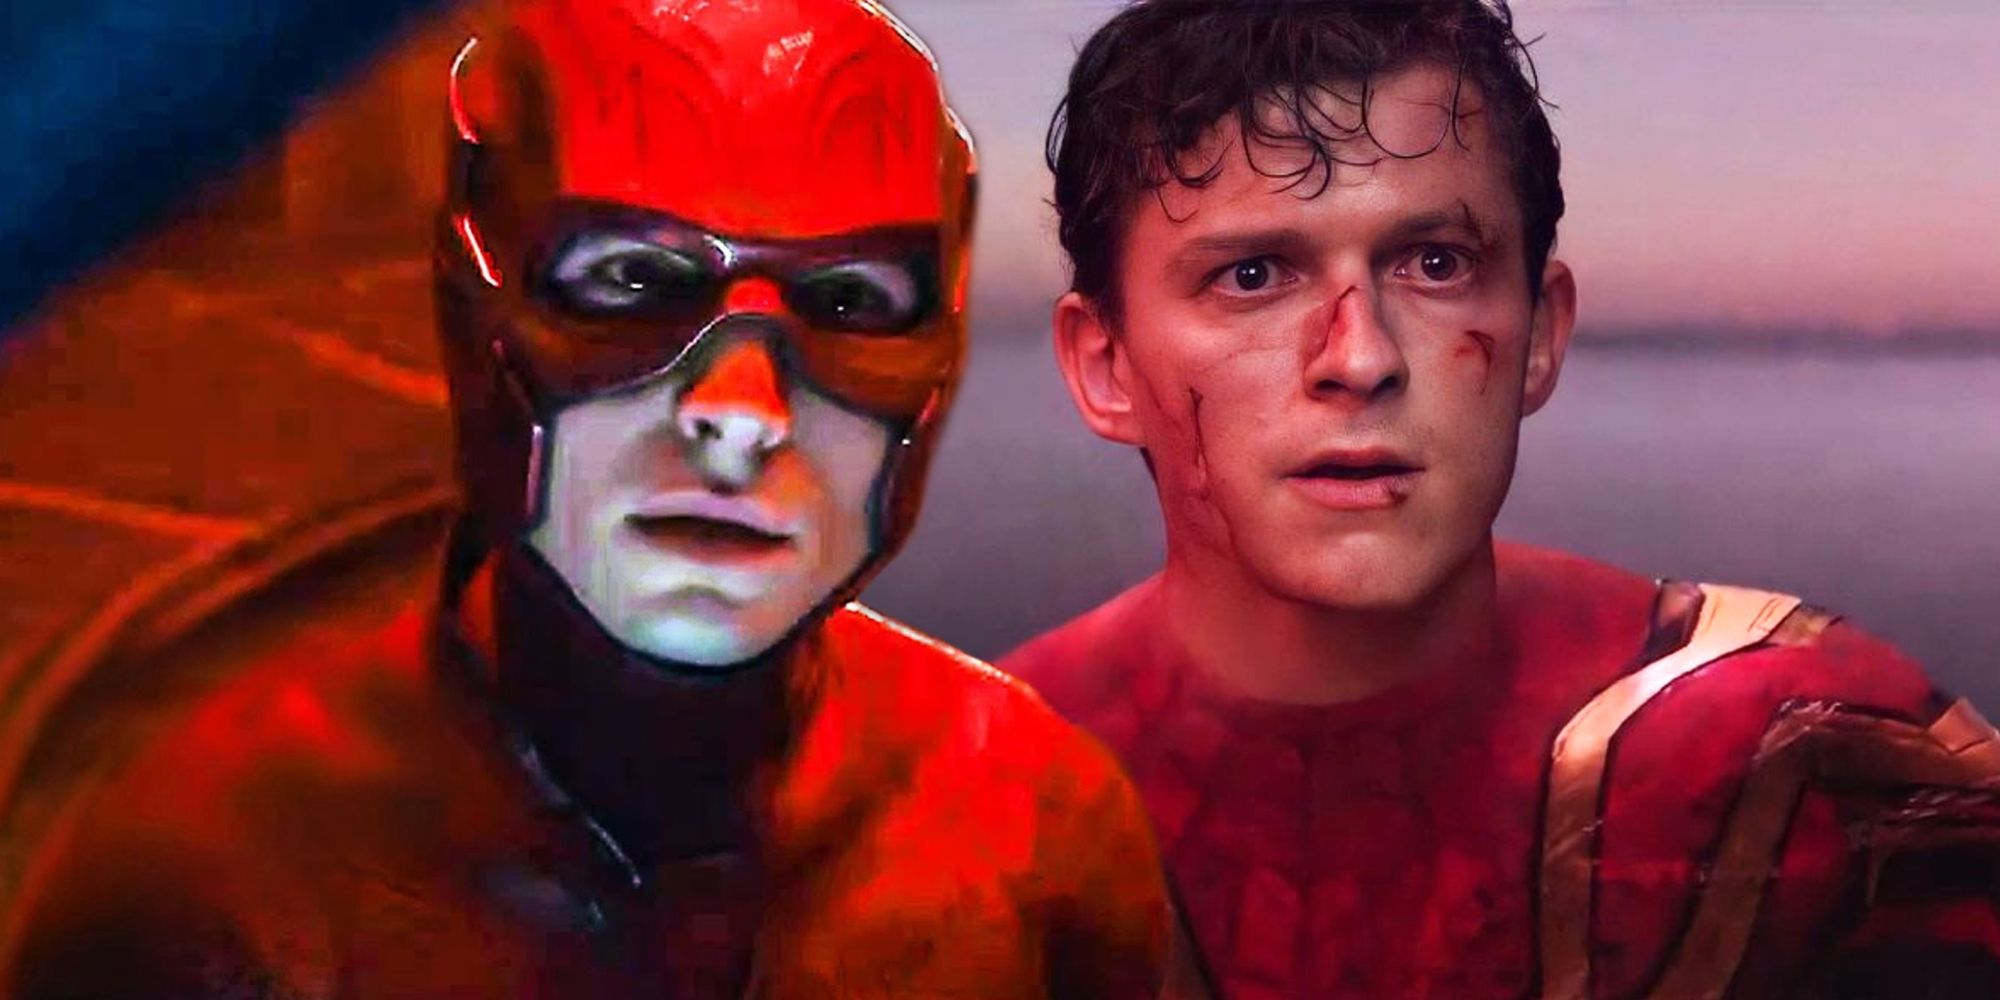 Ezra Miller in The Flash and Tom Holland in Spider-Man No Way Home